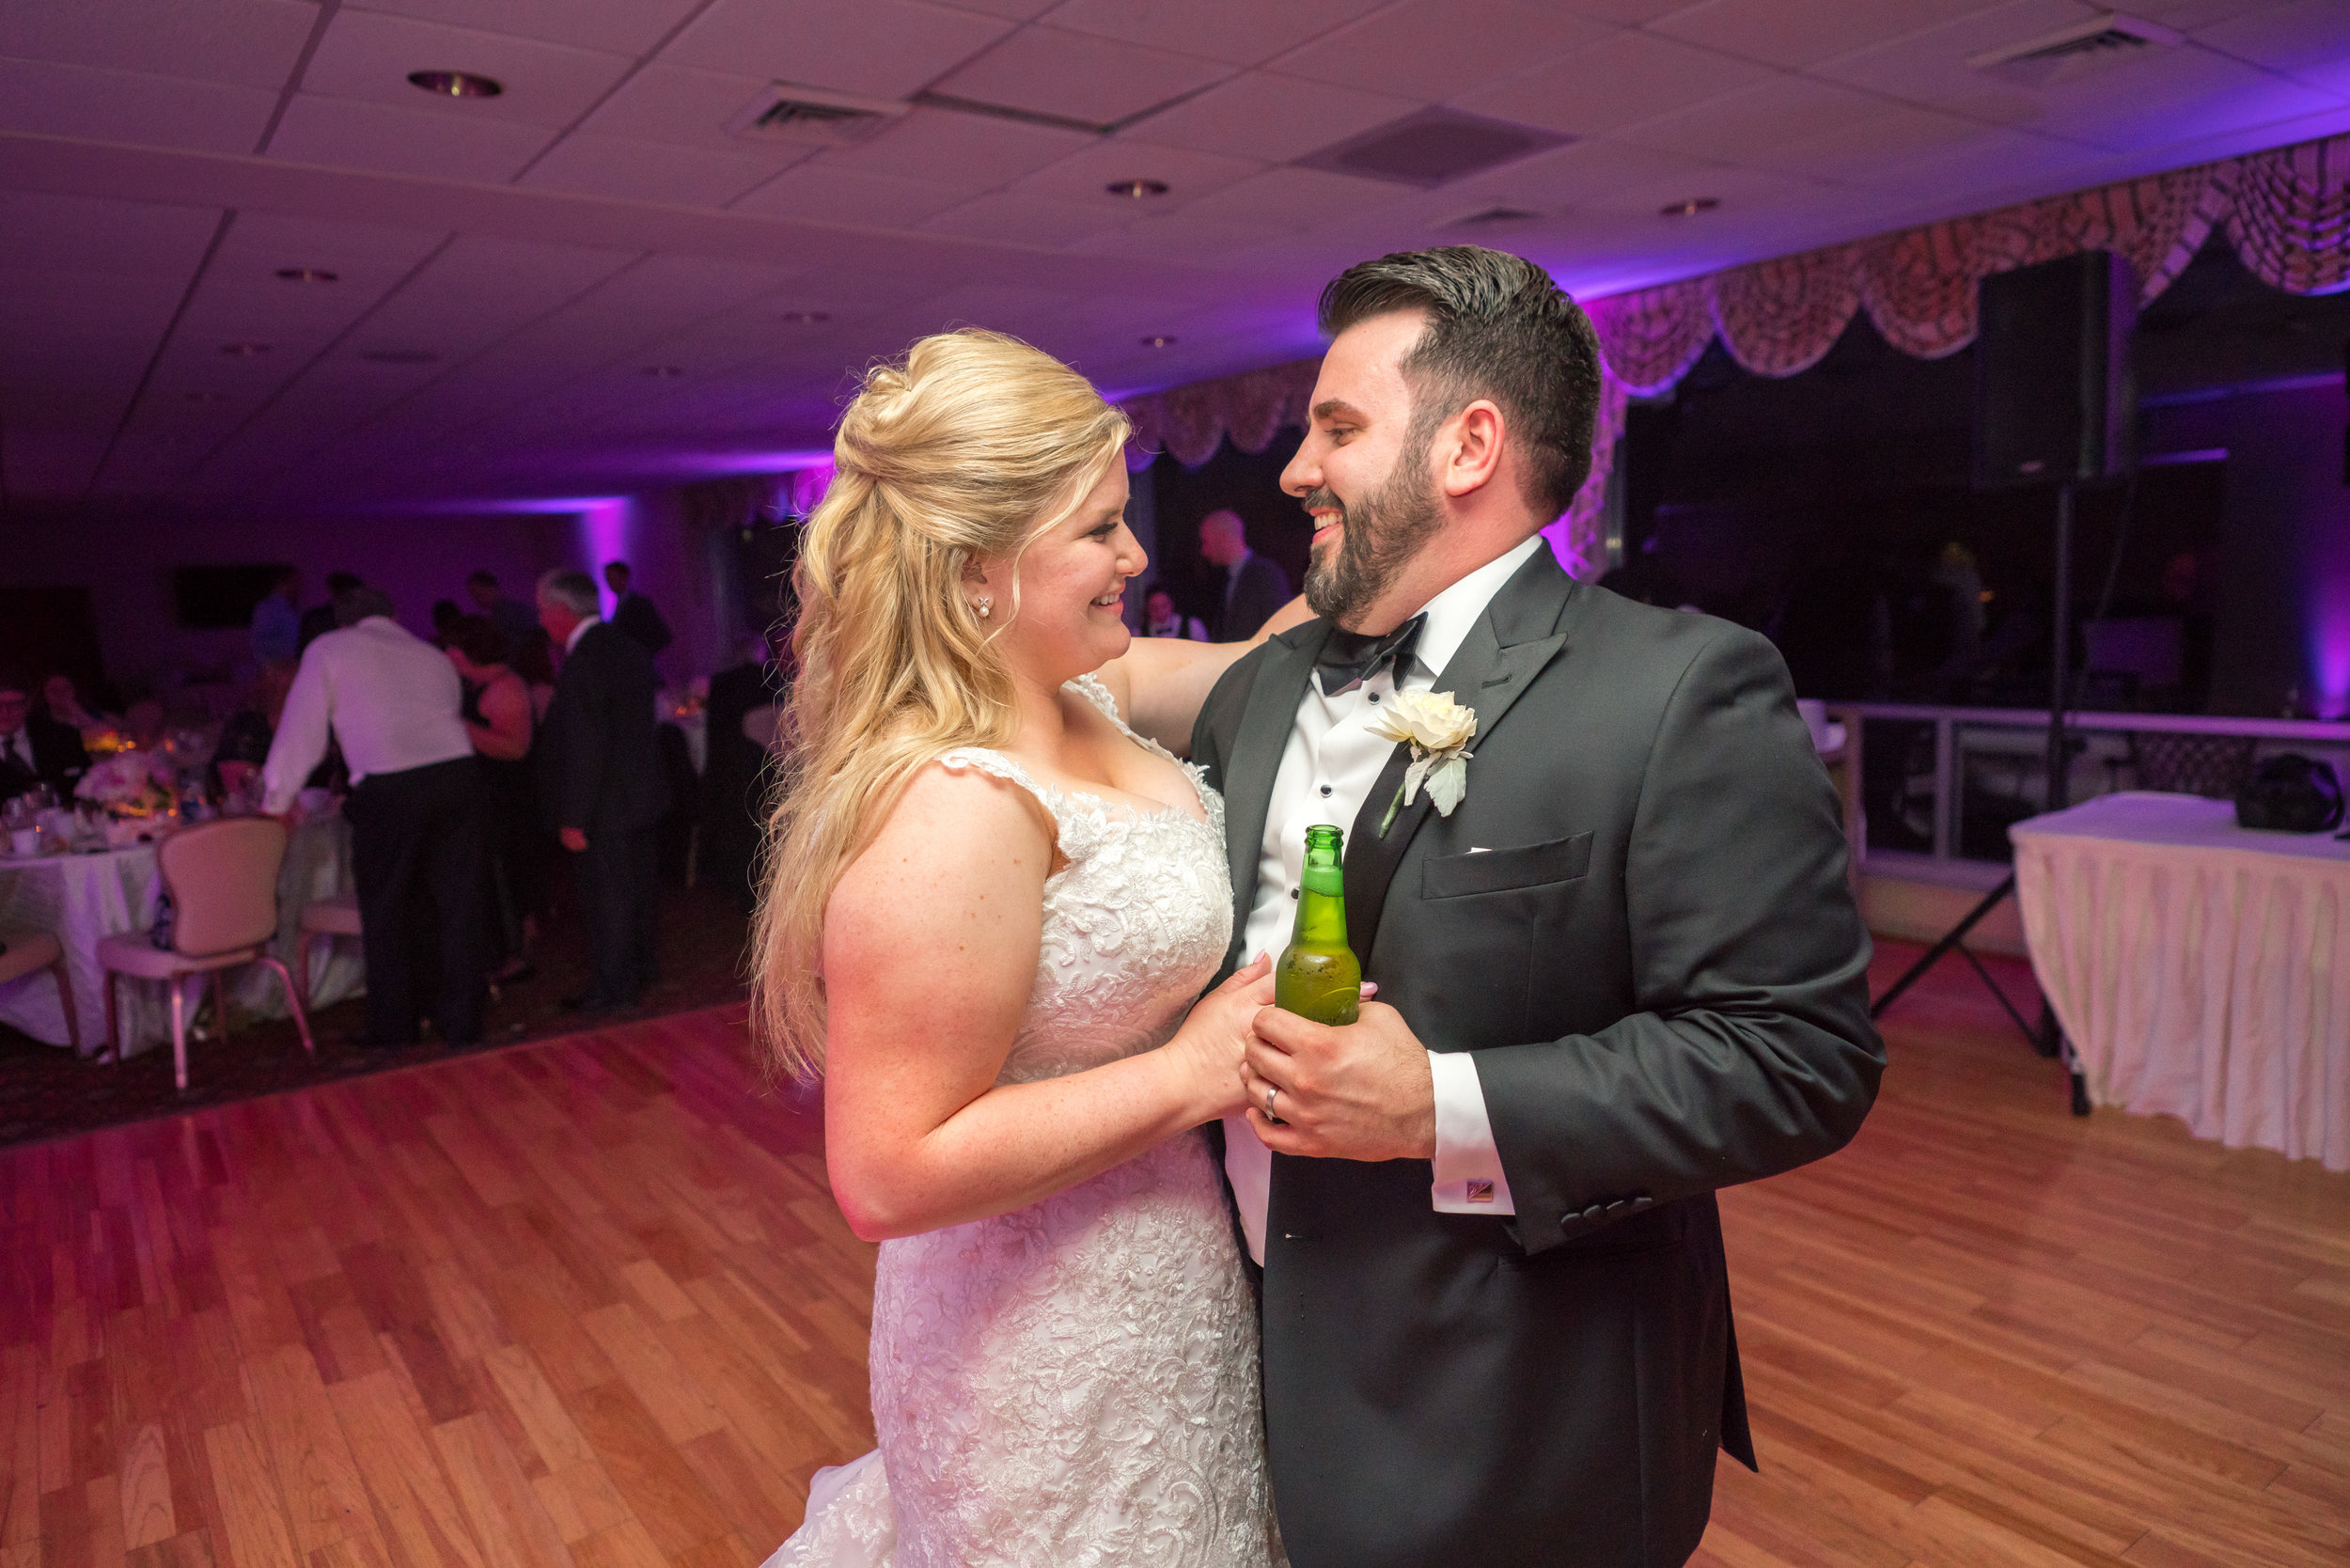 First and last dance photos at Ft Belvoir Wedding Reception